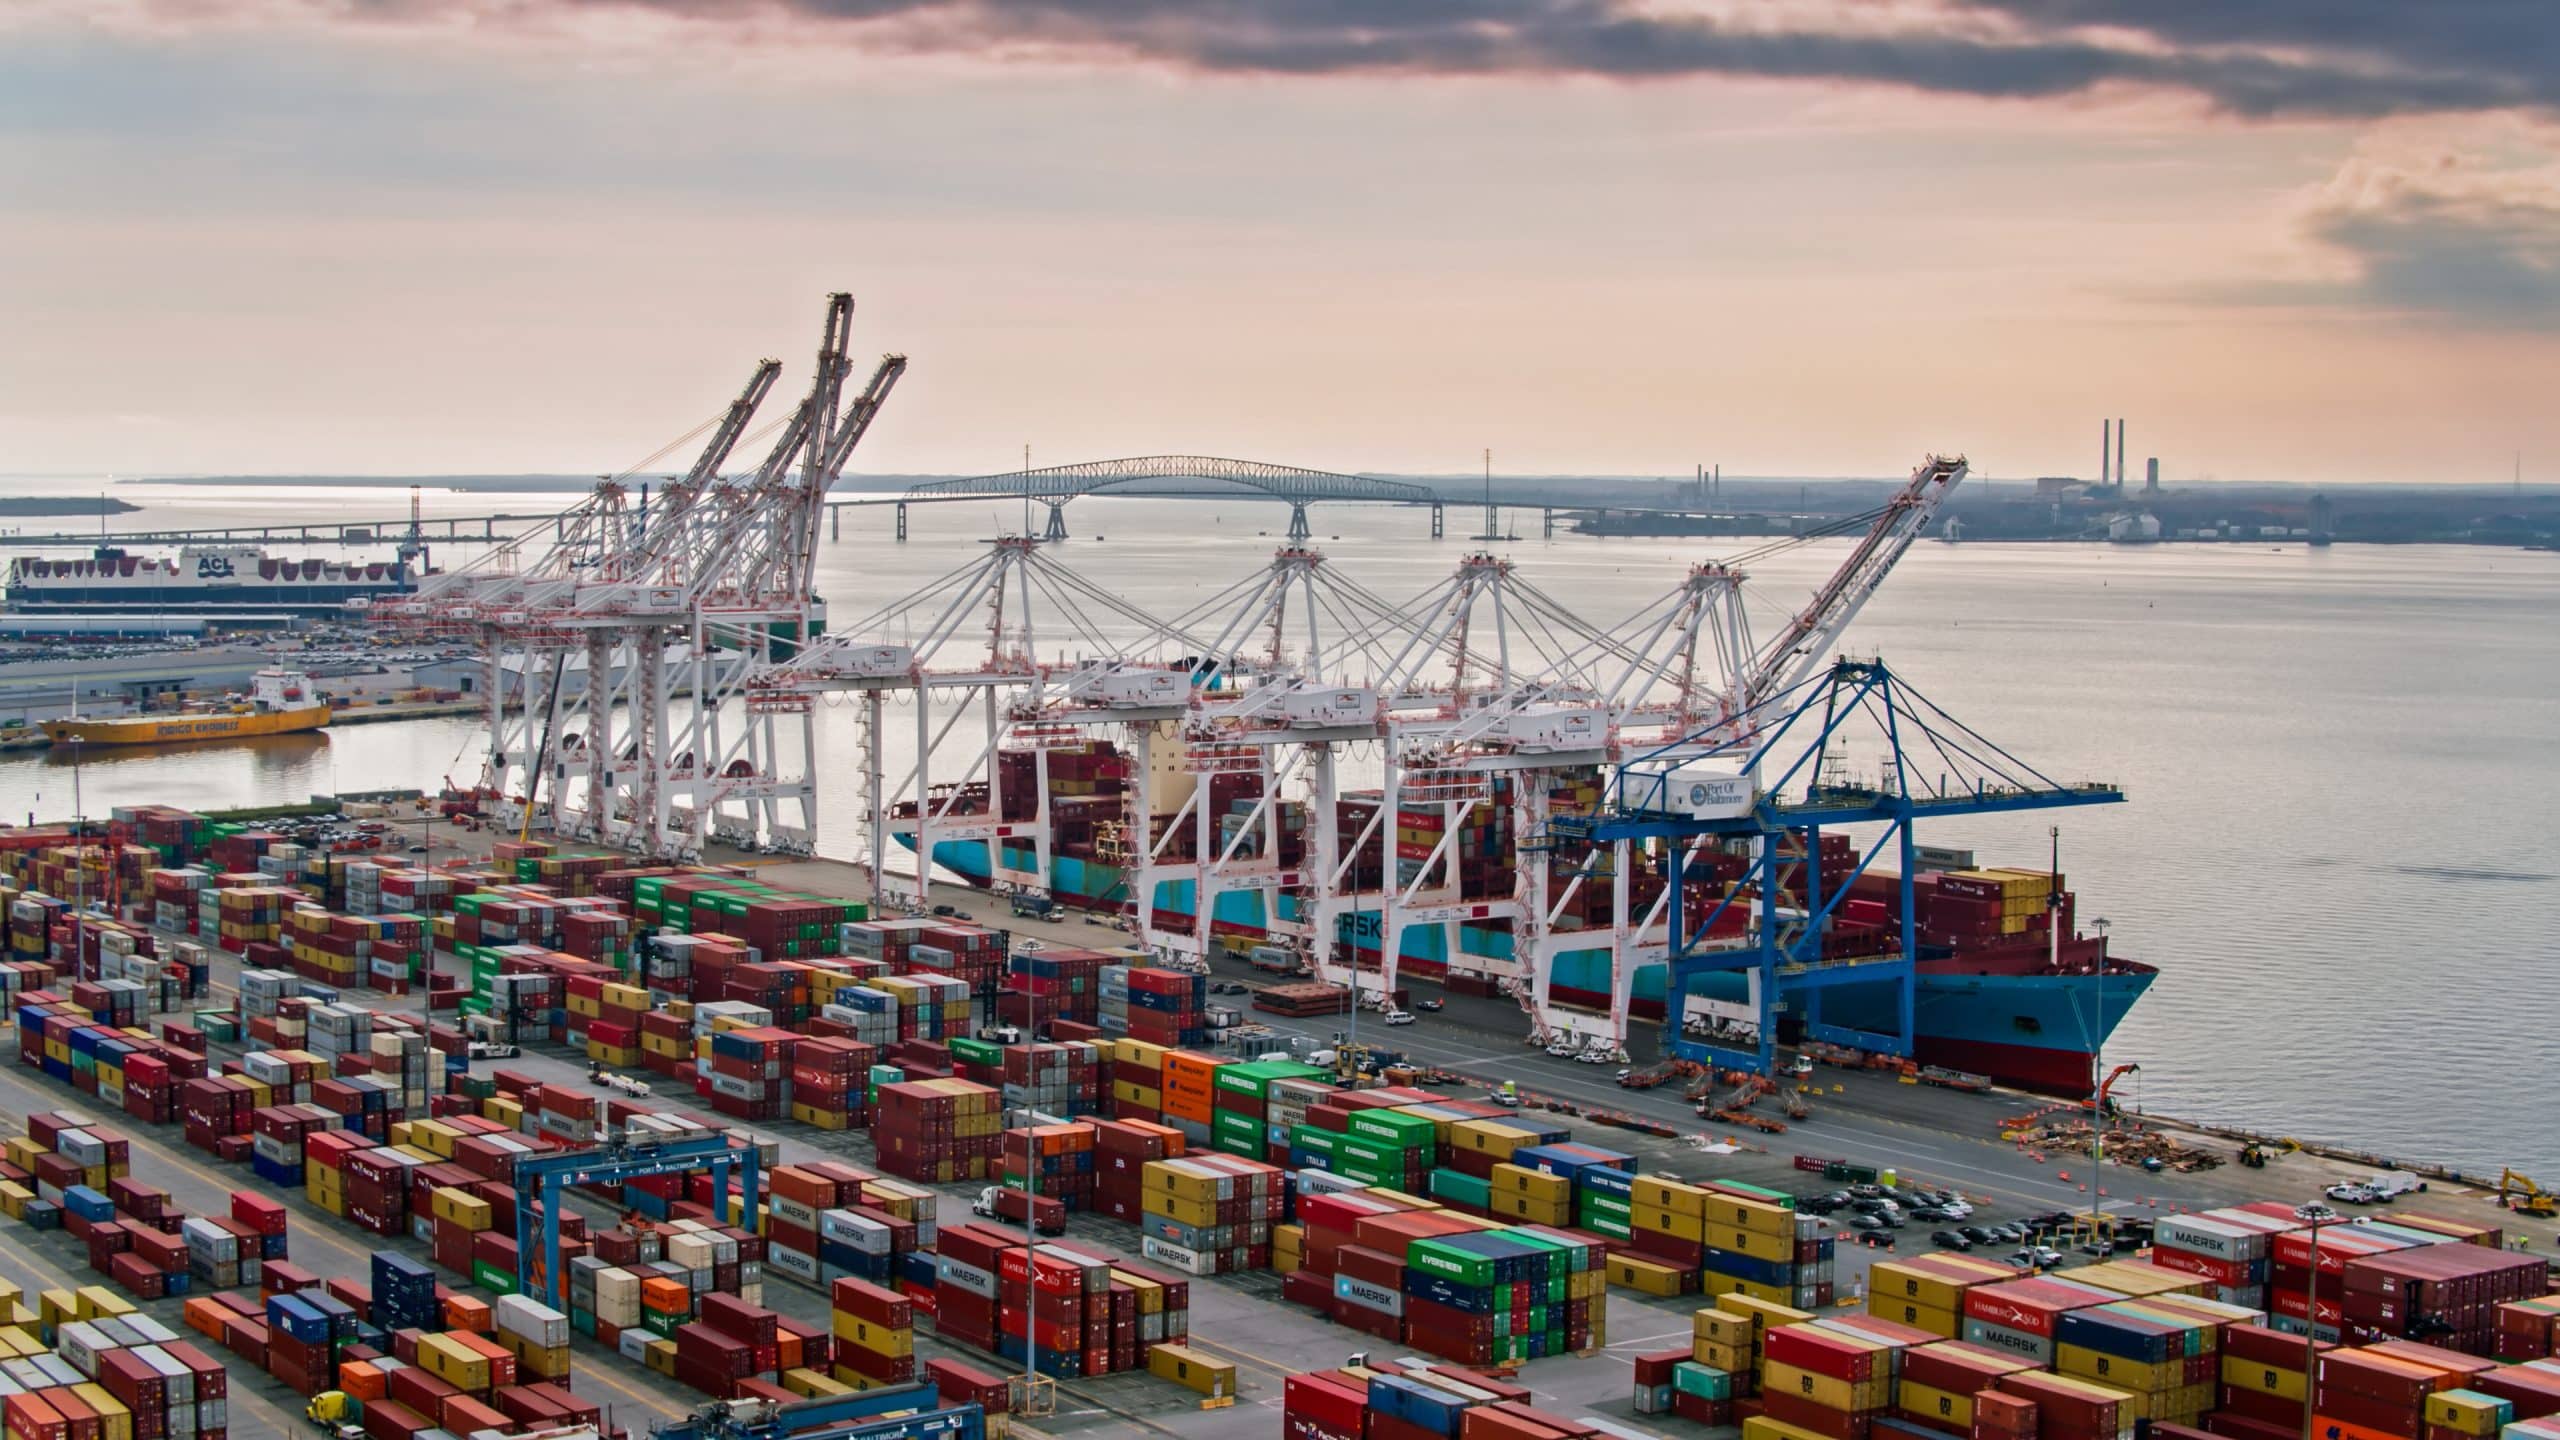 Port of Baltimore’s Indefinite Closure Deals Blow to City, State Economy